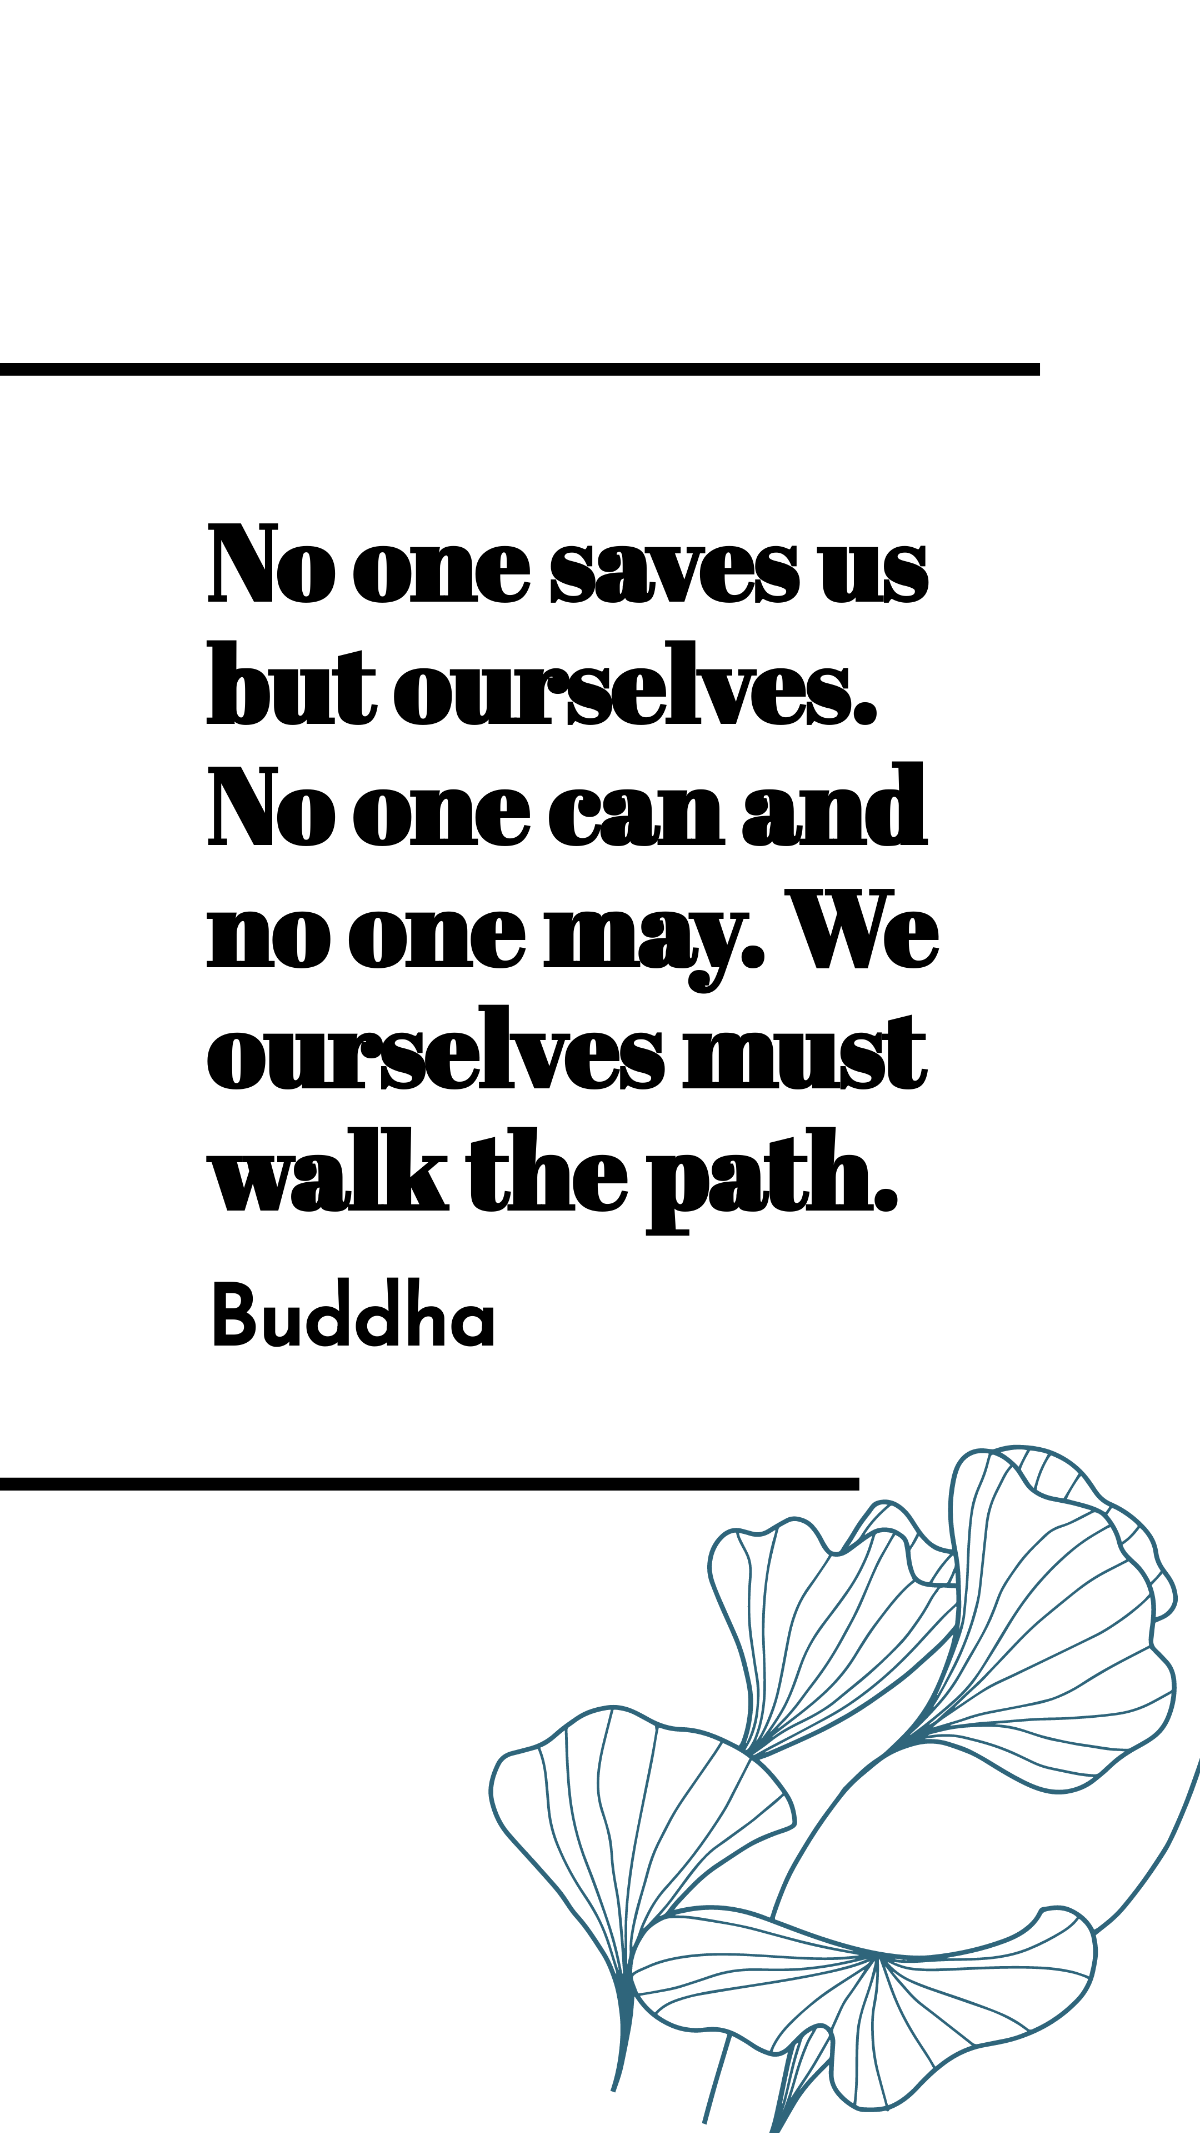 Buddha - No one saves us but ourselves. No one can and no one may. We ourselves must walk the path. Template